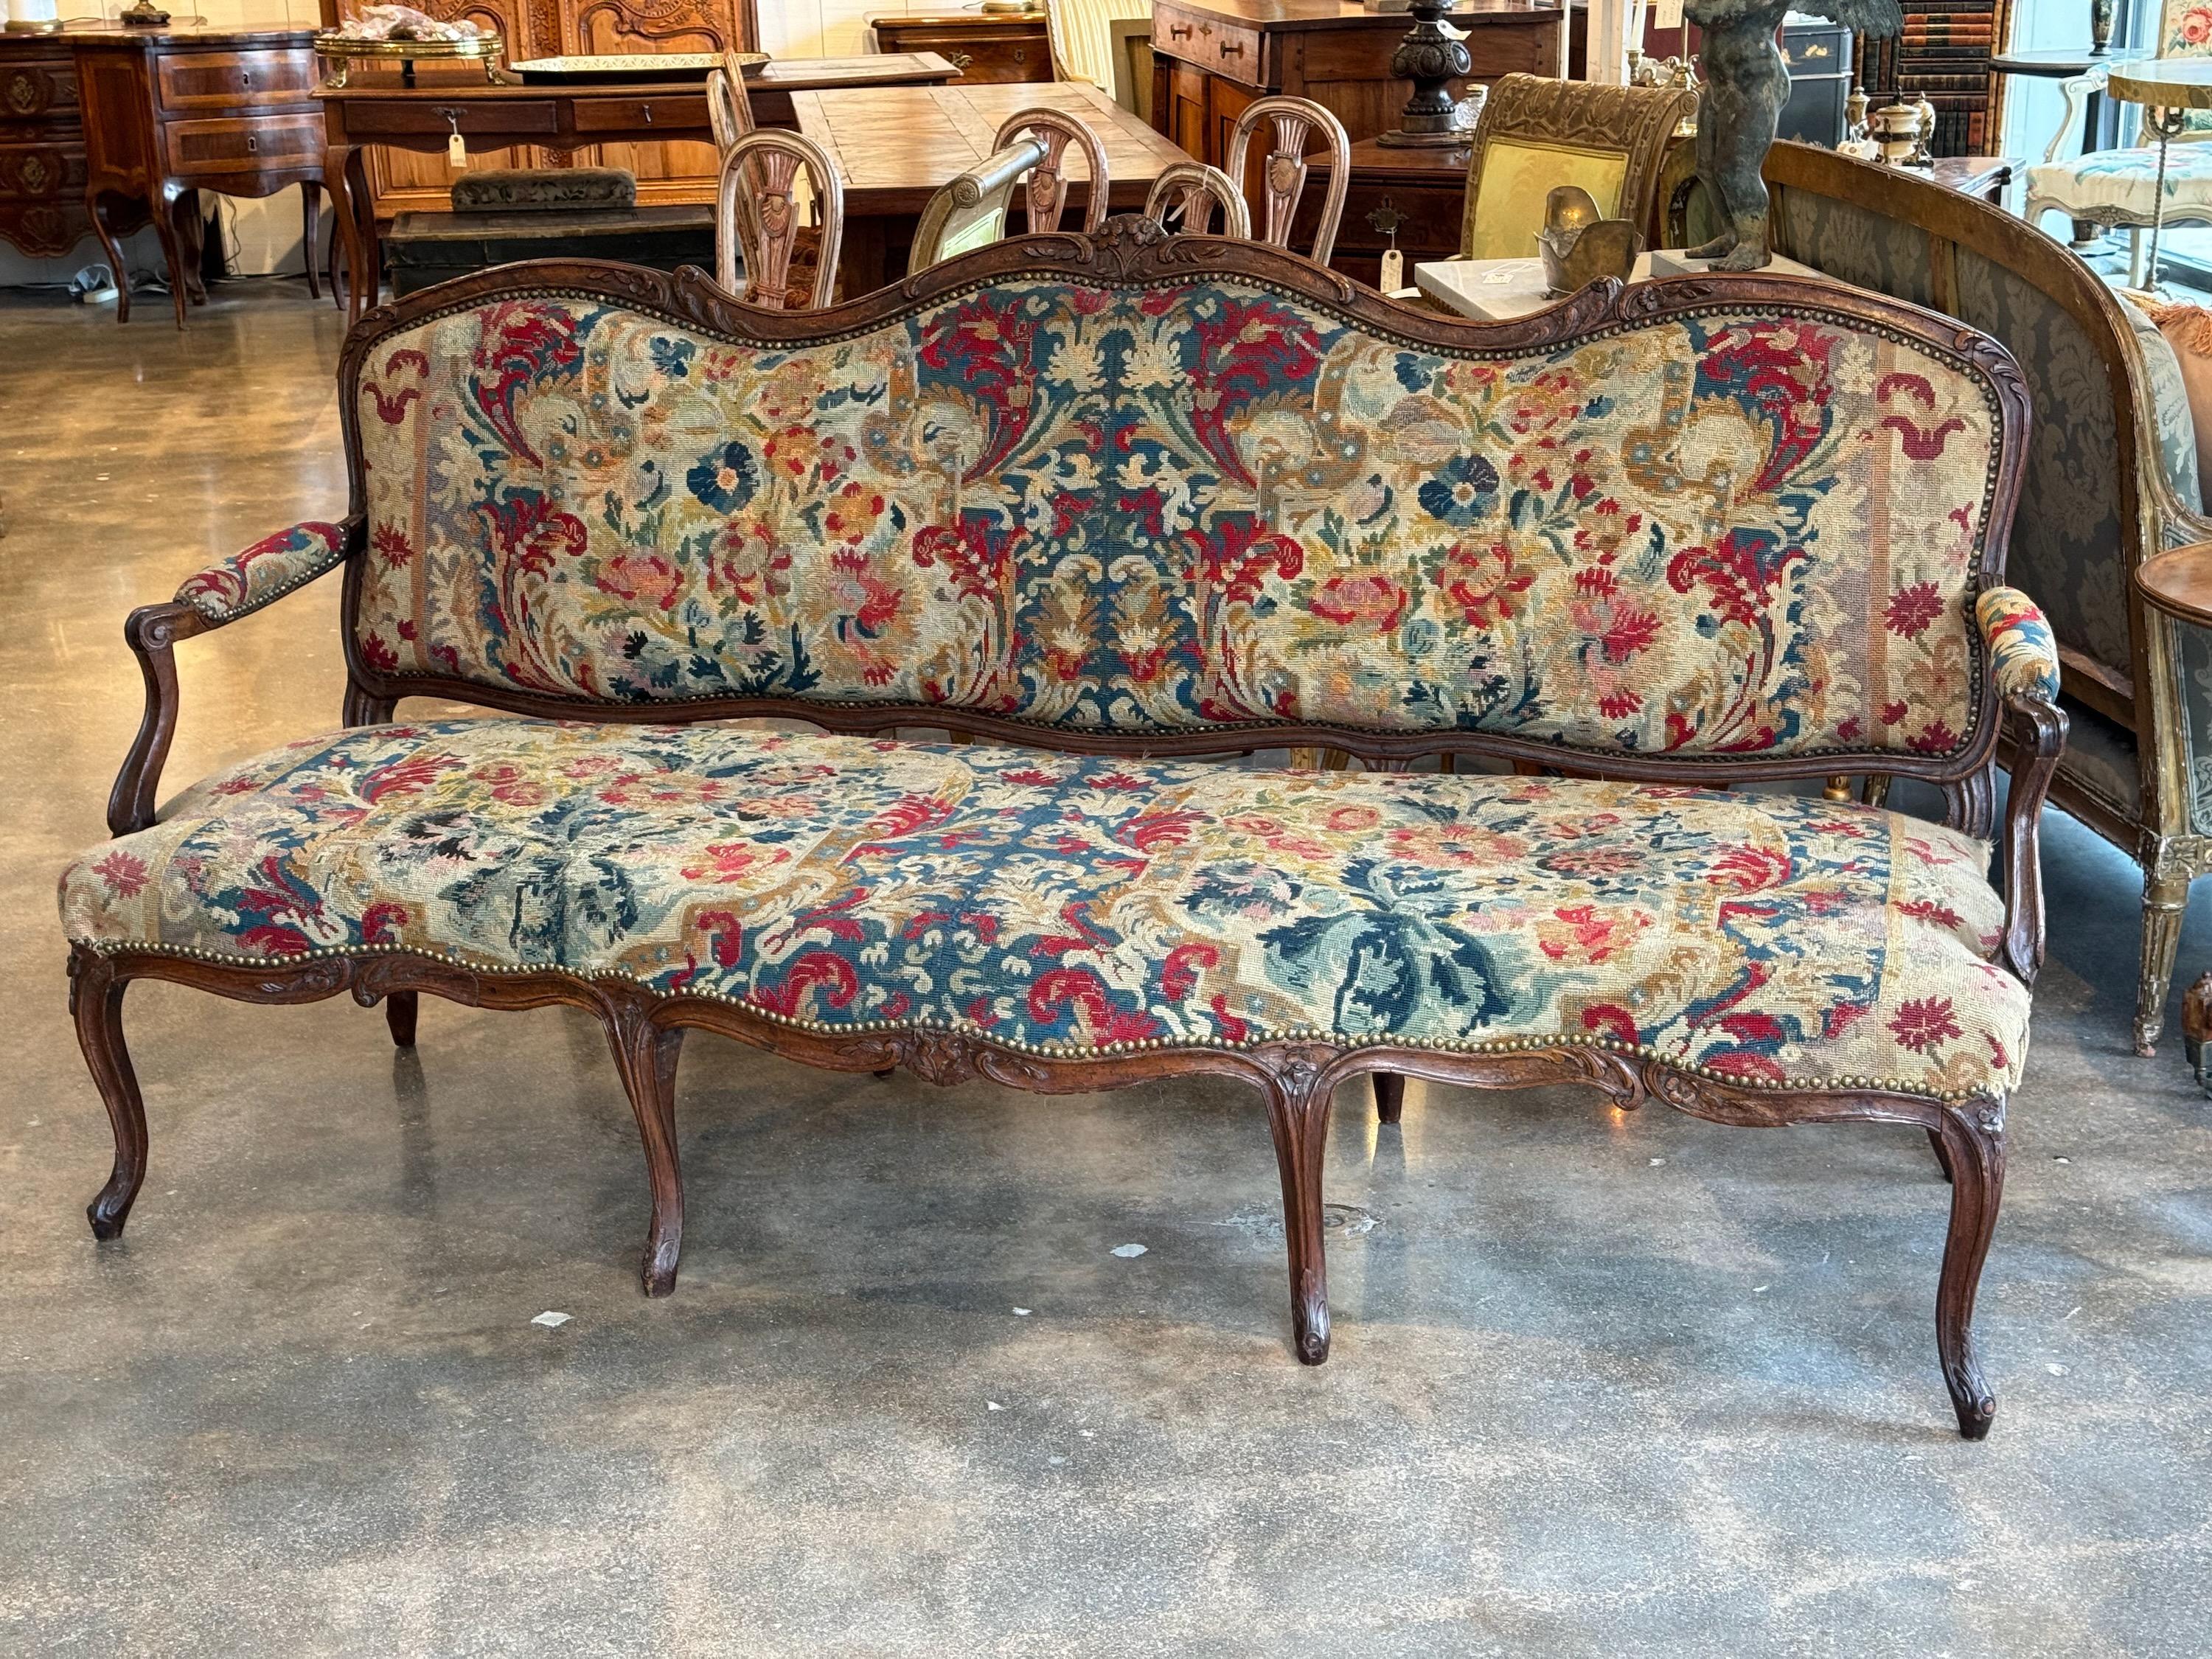 This is a beautiful French settee covered in needle point. It has graceful lines. Perfect hall bench.